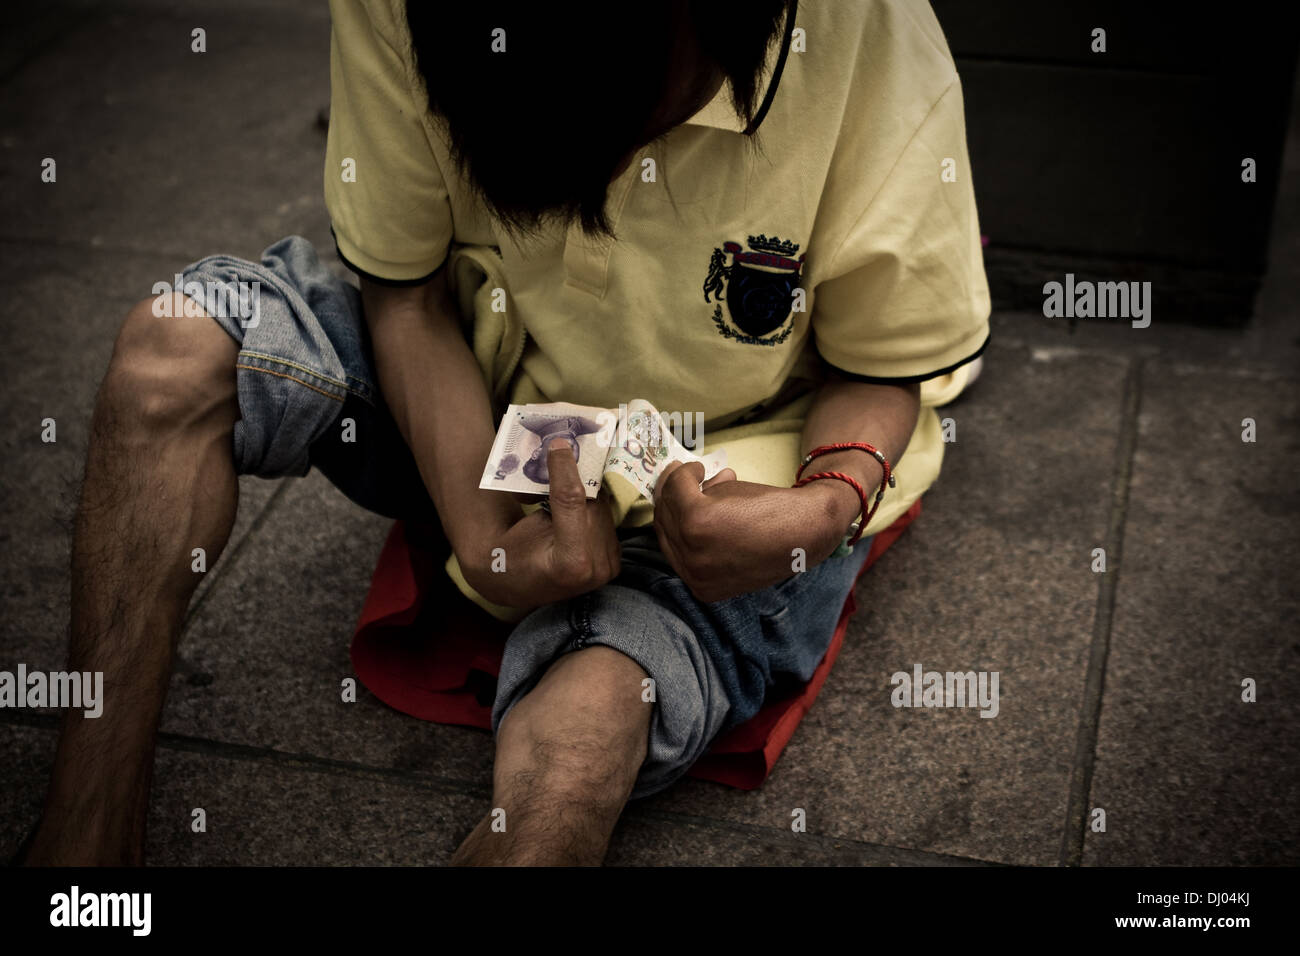 Image taken in Shanghai, China in 2011. Documenting various people on the streets who was constantly begging. Stock Photo